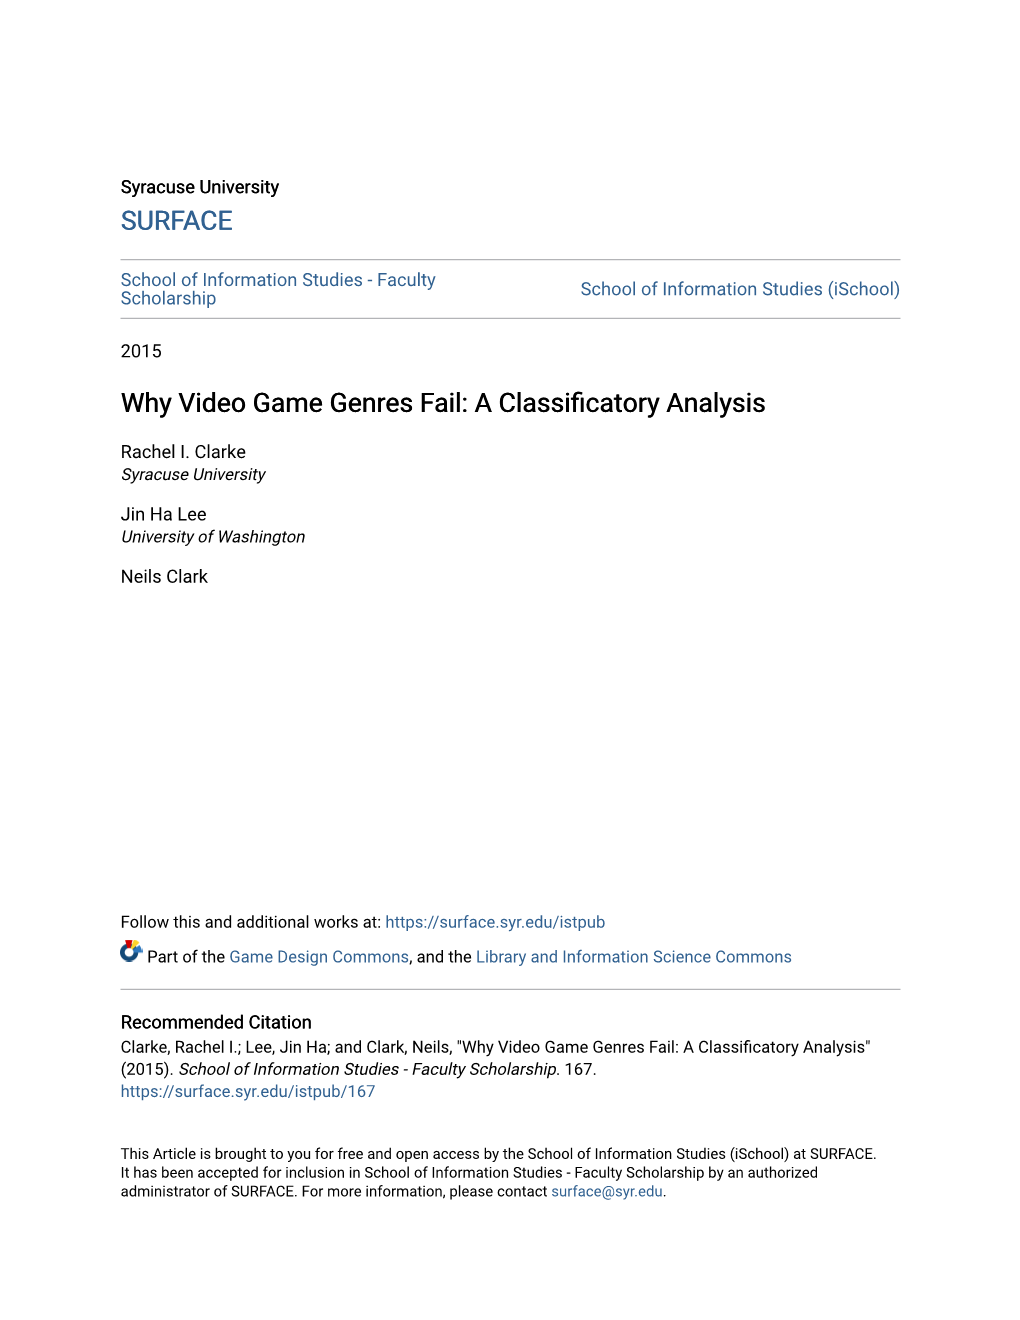 Why Video Game Genres Fail: a Classificatory Analysis